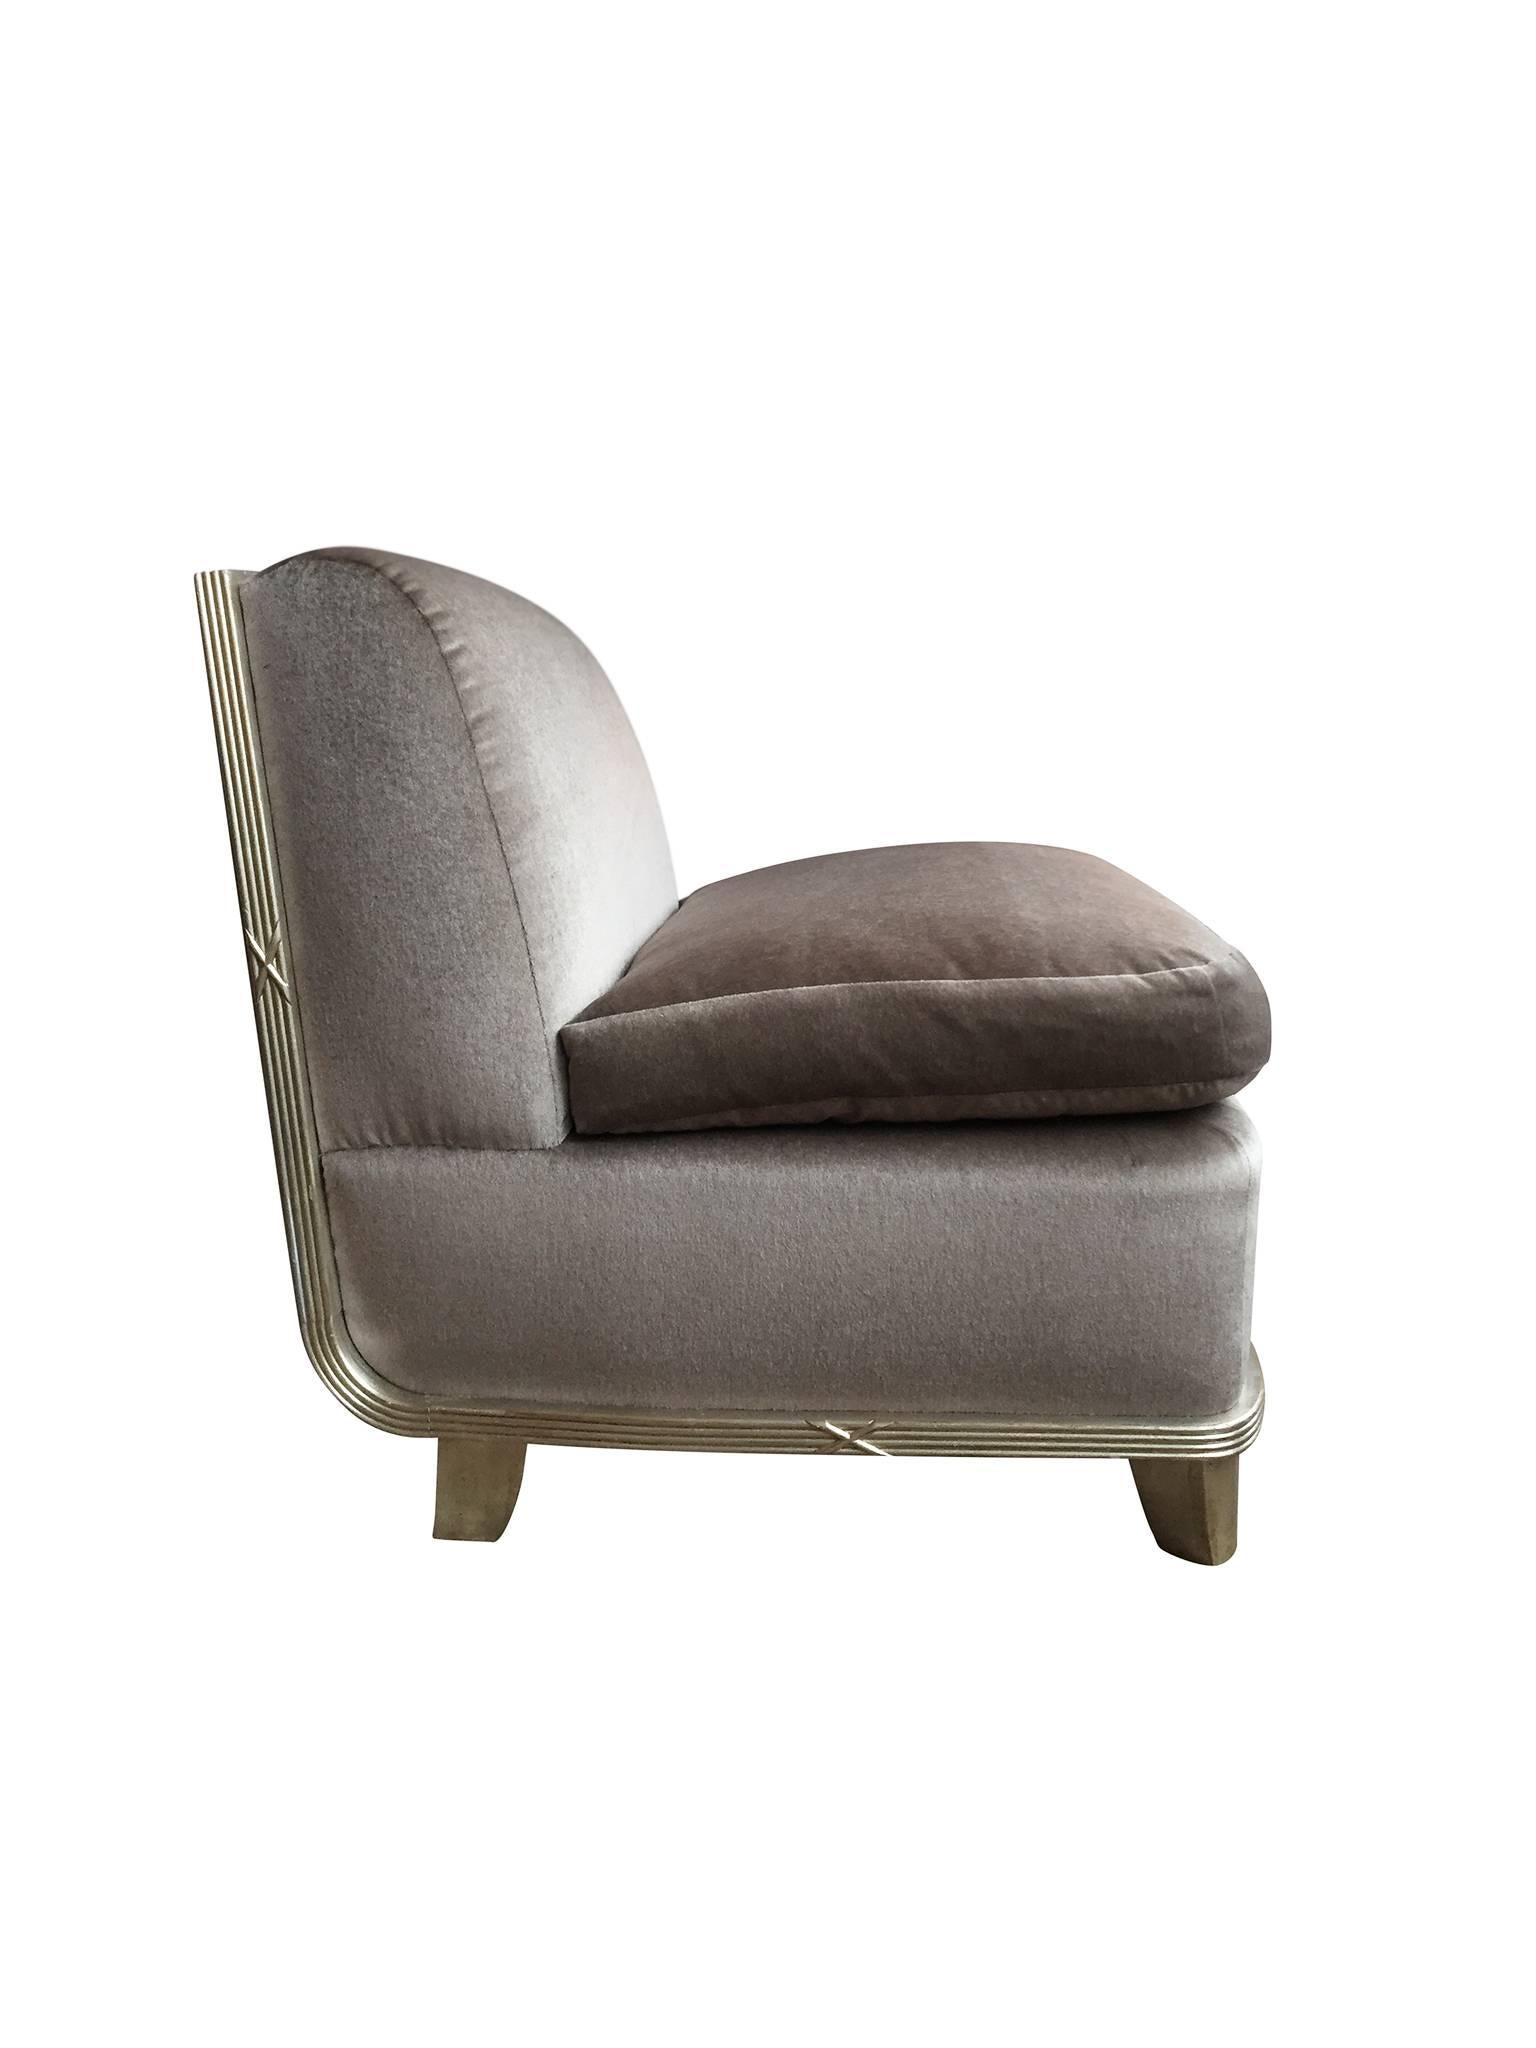 Hollywood Regency 1960s Silver Mohair Lounge Chair in the Style of James Mont